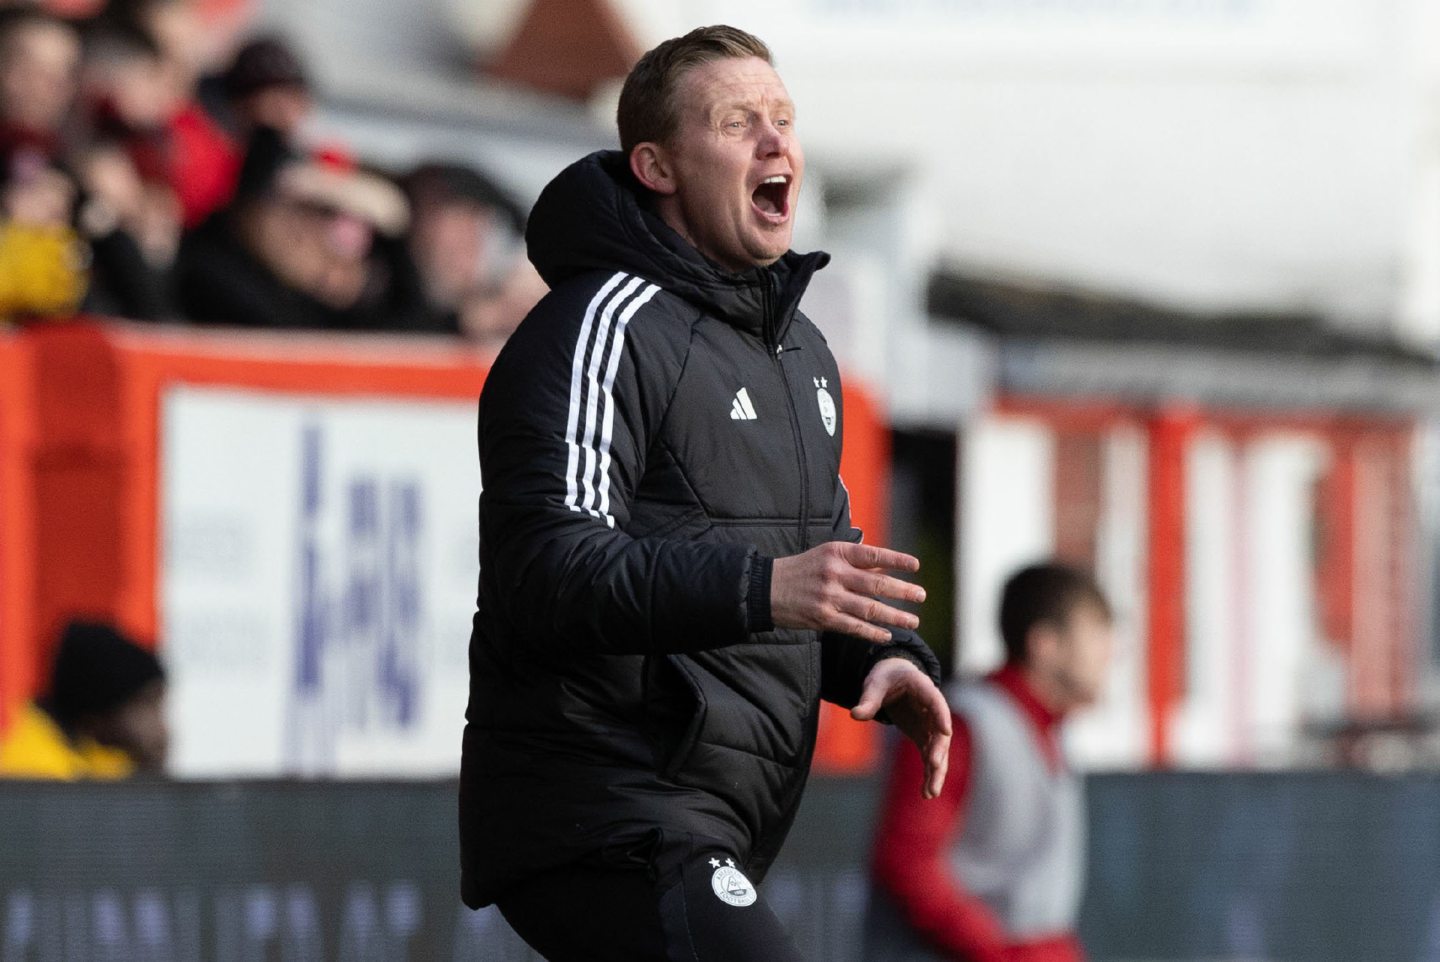 Aberdeen manager Barry Robson during a Premiership match against Rangers at Pittodrie. Image: SNS